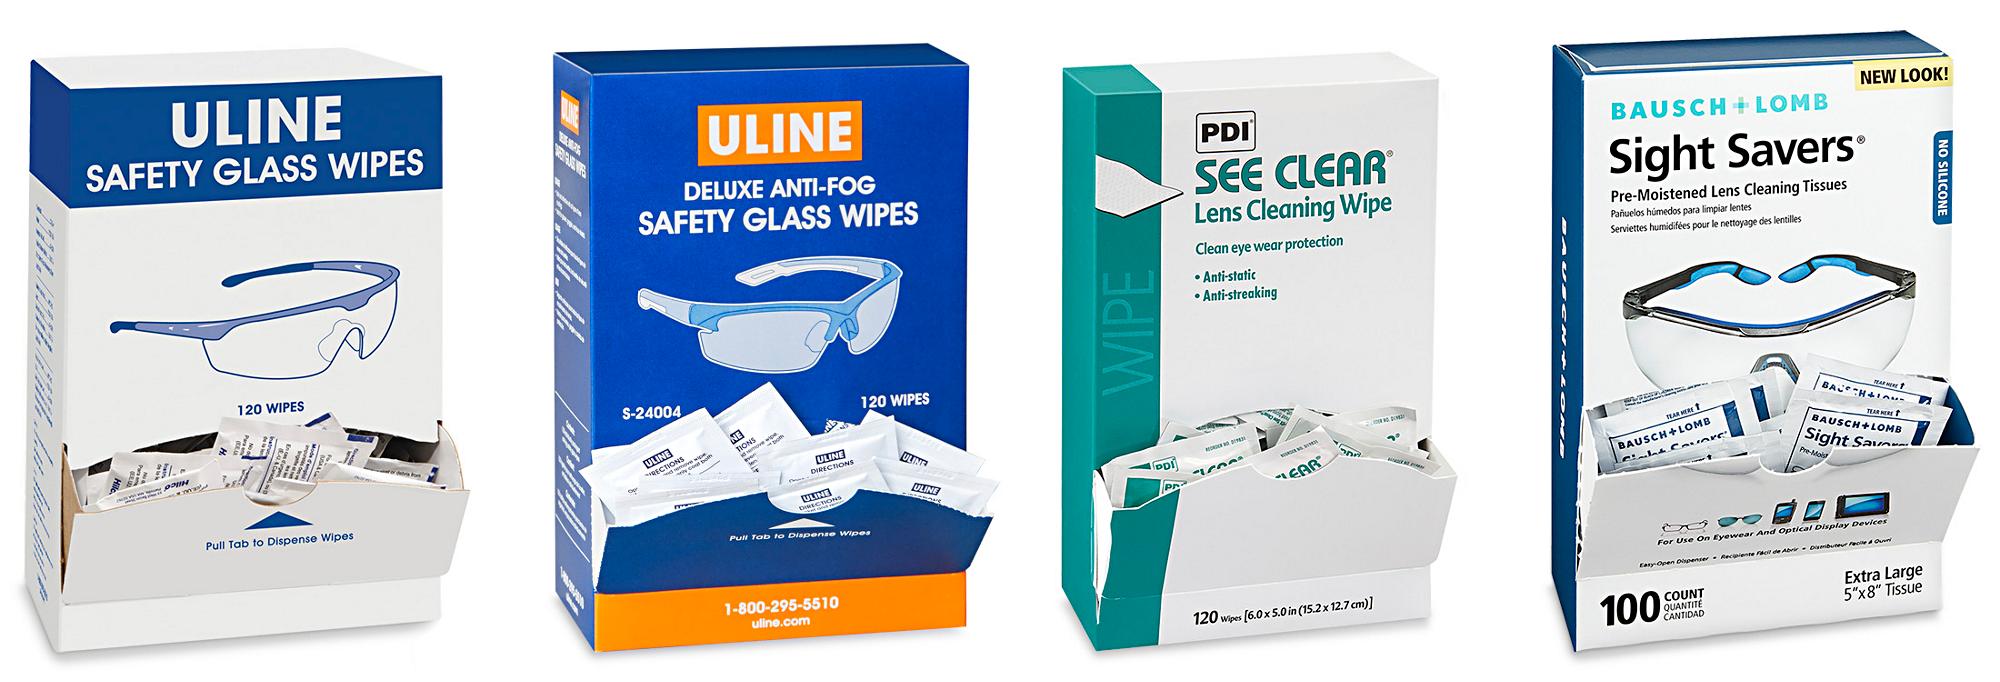 Safety Glass Wipes